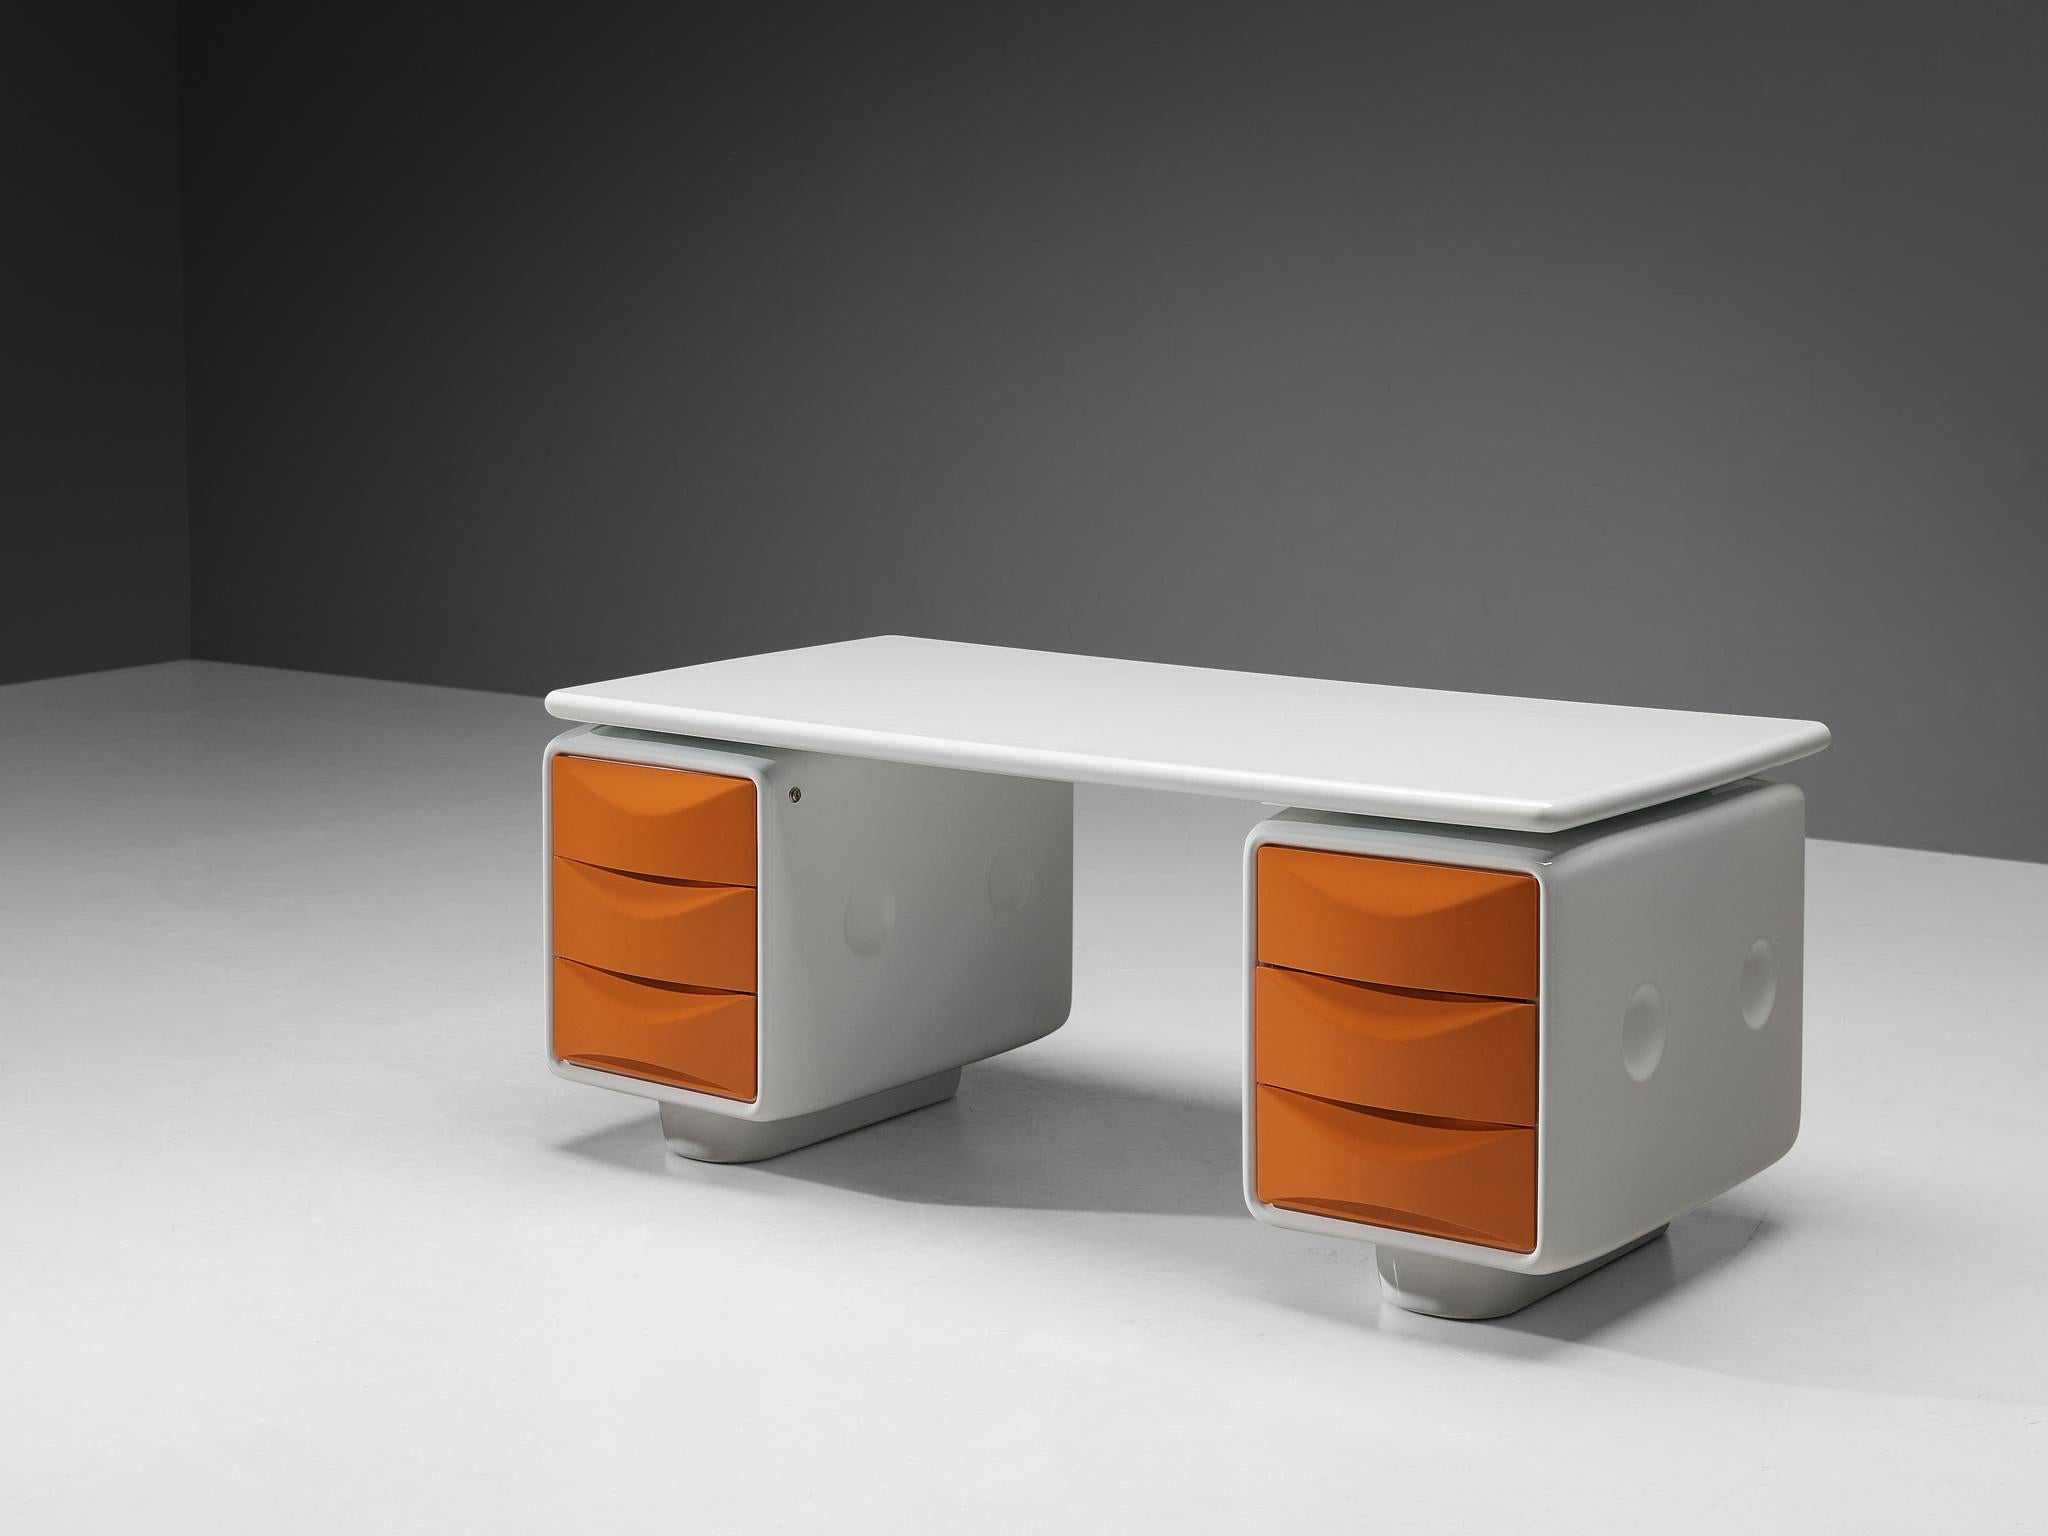 Ernest Igl for Wilhelm Werndl, Directors writing desk model 'Igl-jet', fiberglass, Czech Republic, 1970s

This design truly resembles the ethos of the seventies – a bright and bold era – featuring the commonly used material of that time named